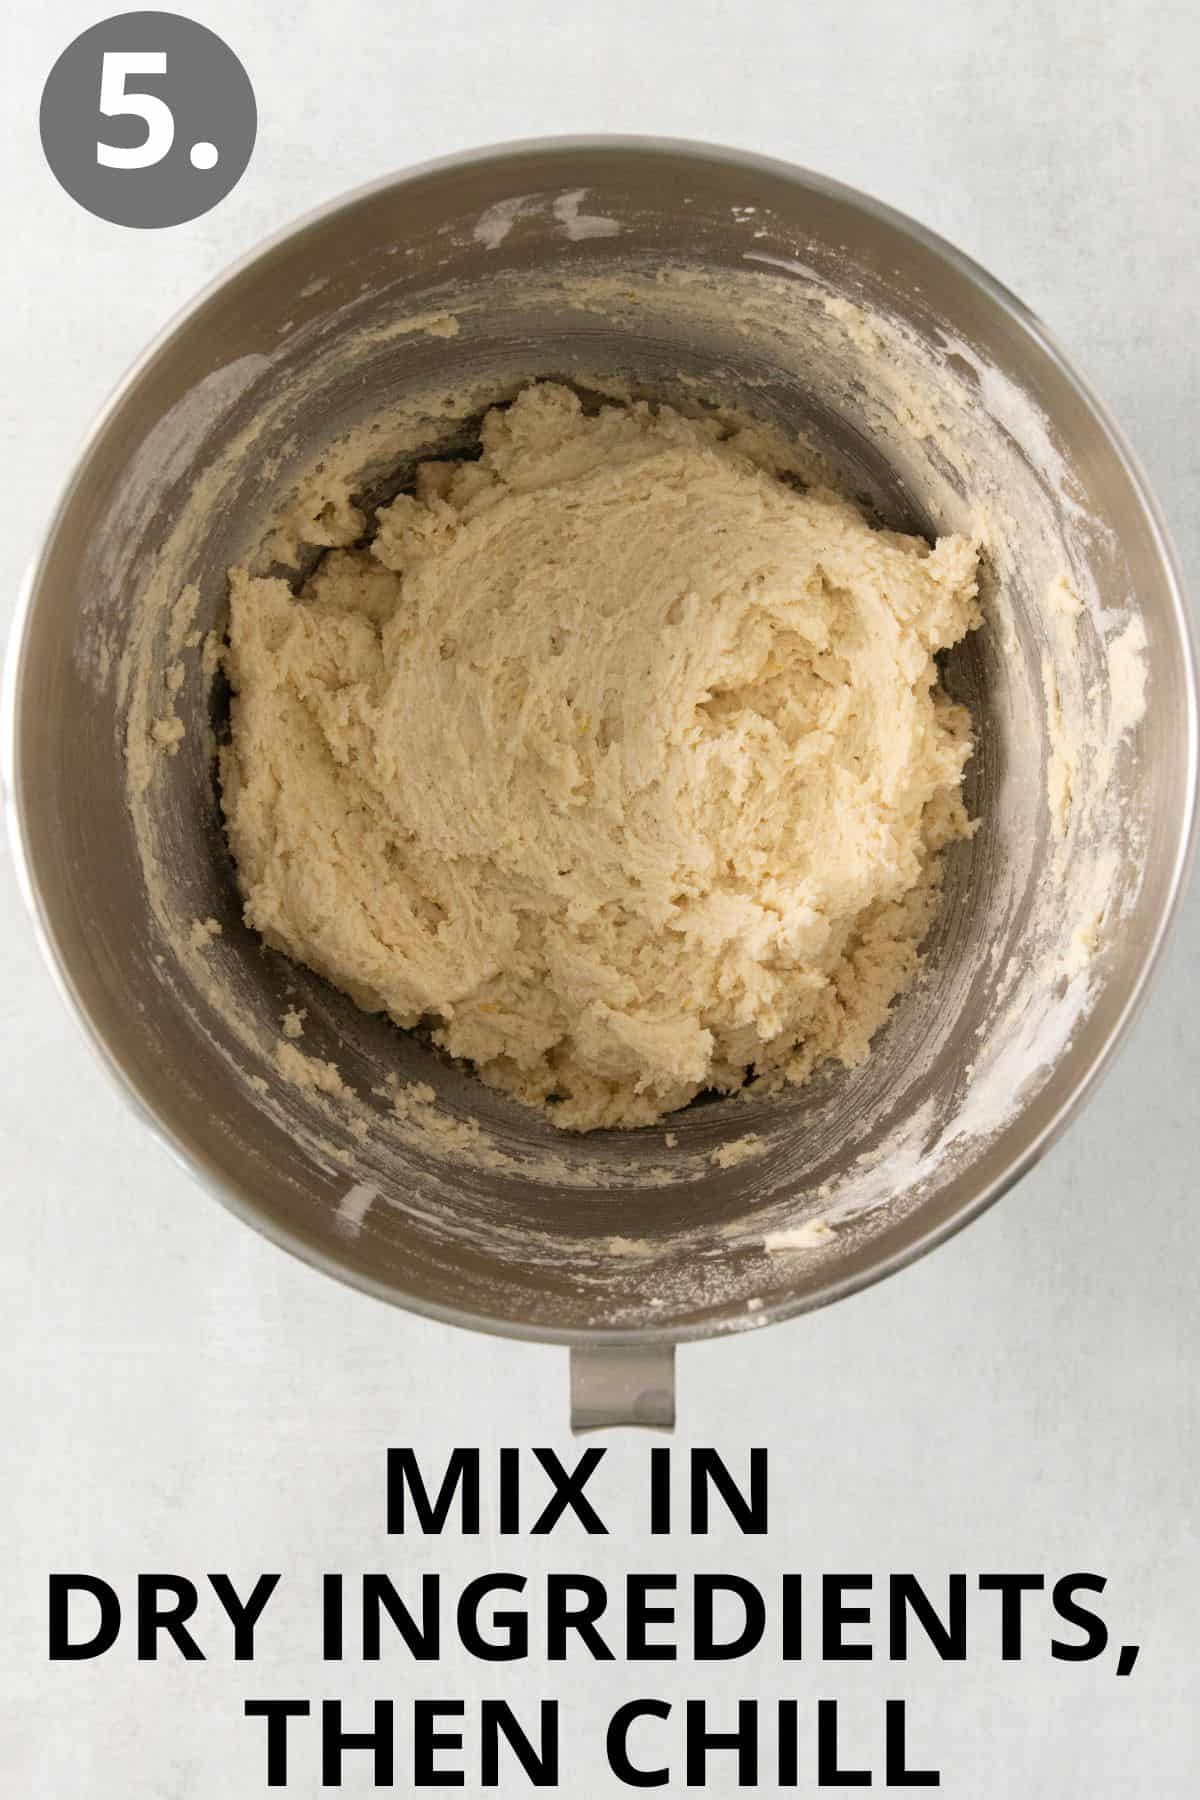 Dry ingredients mixed in a bowl with butter, sugar, and other wet ingredients